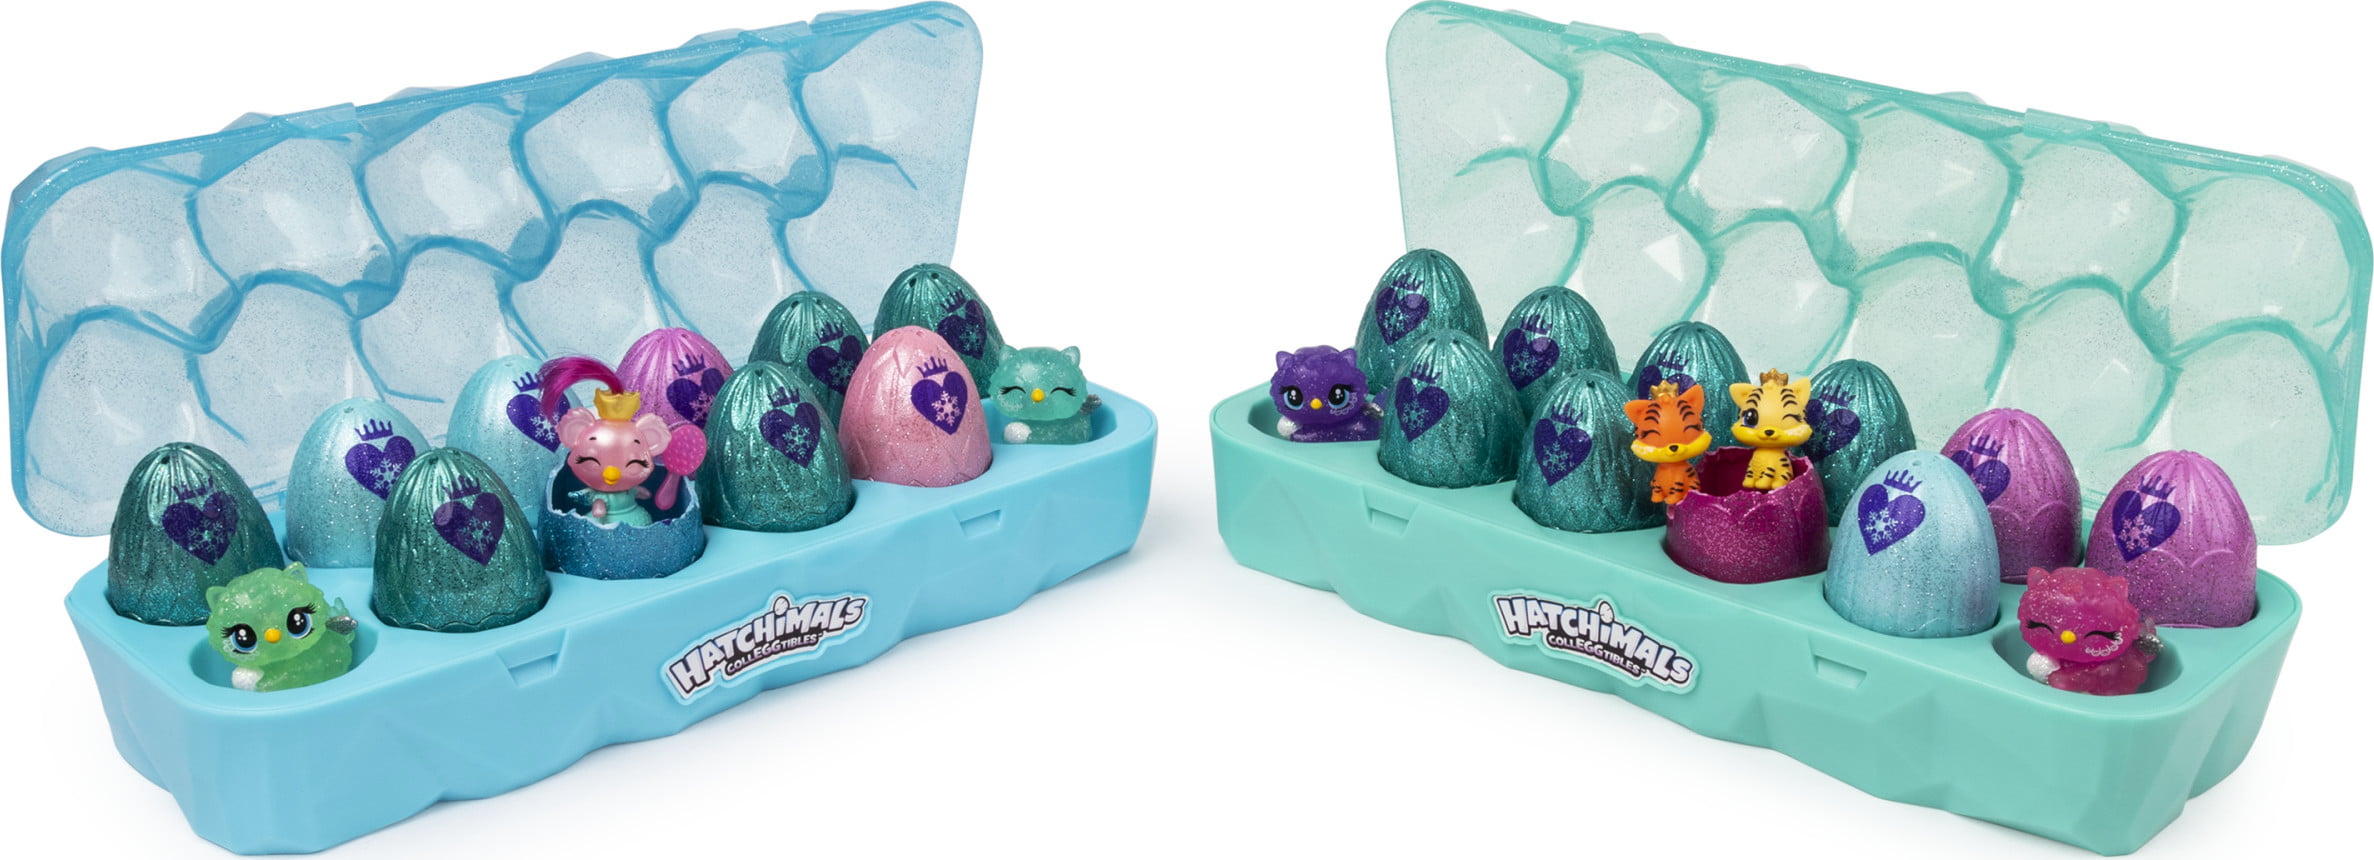 Hatchimals Colleggtibles Royal Snowball Jewelry Blue Box 12-Pack 